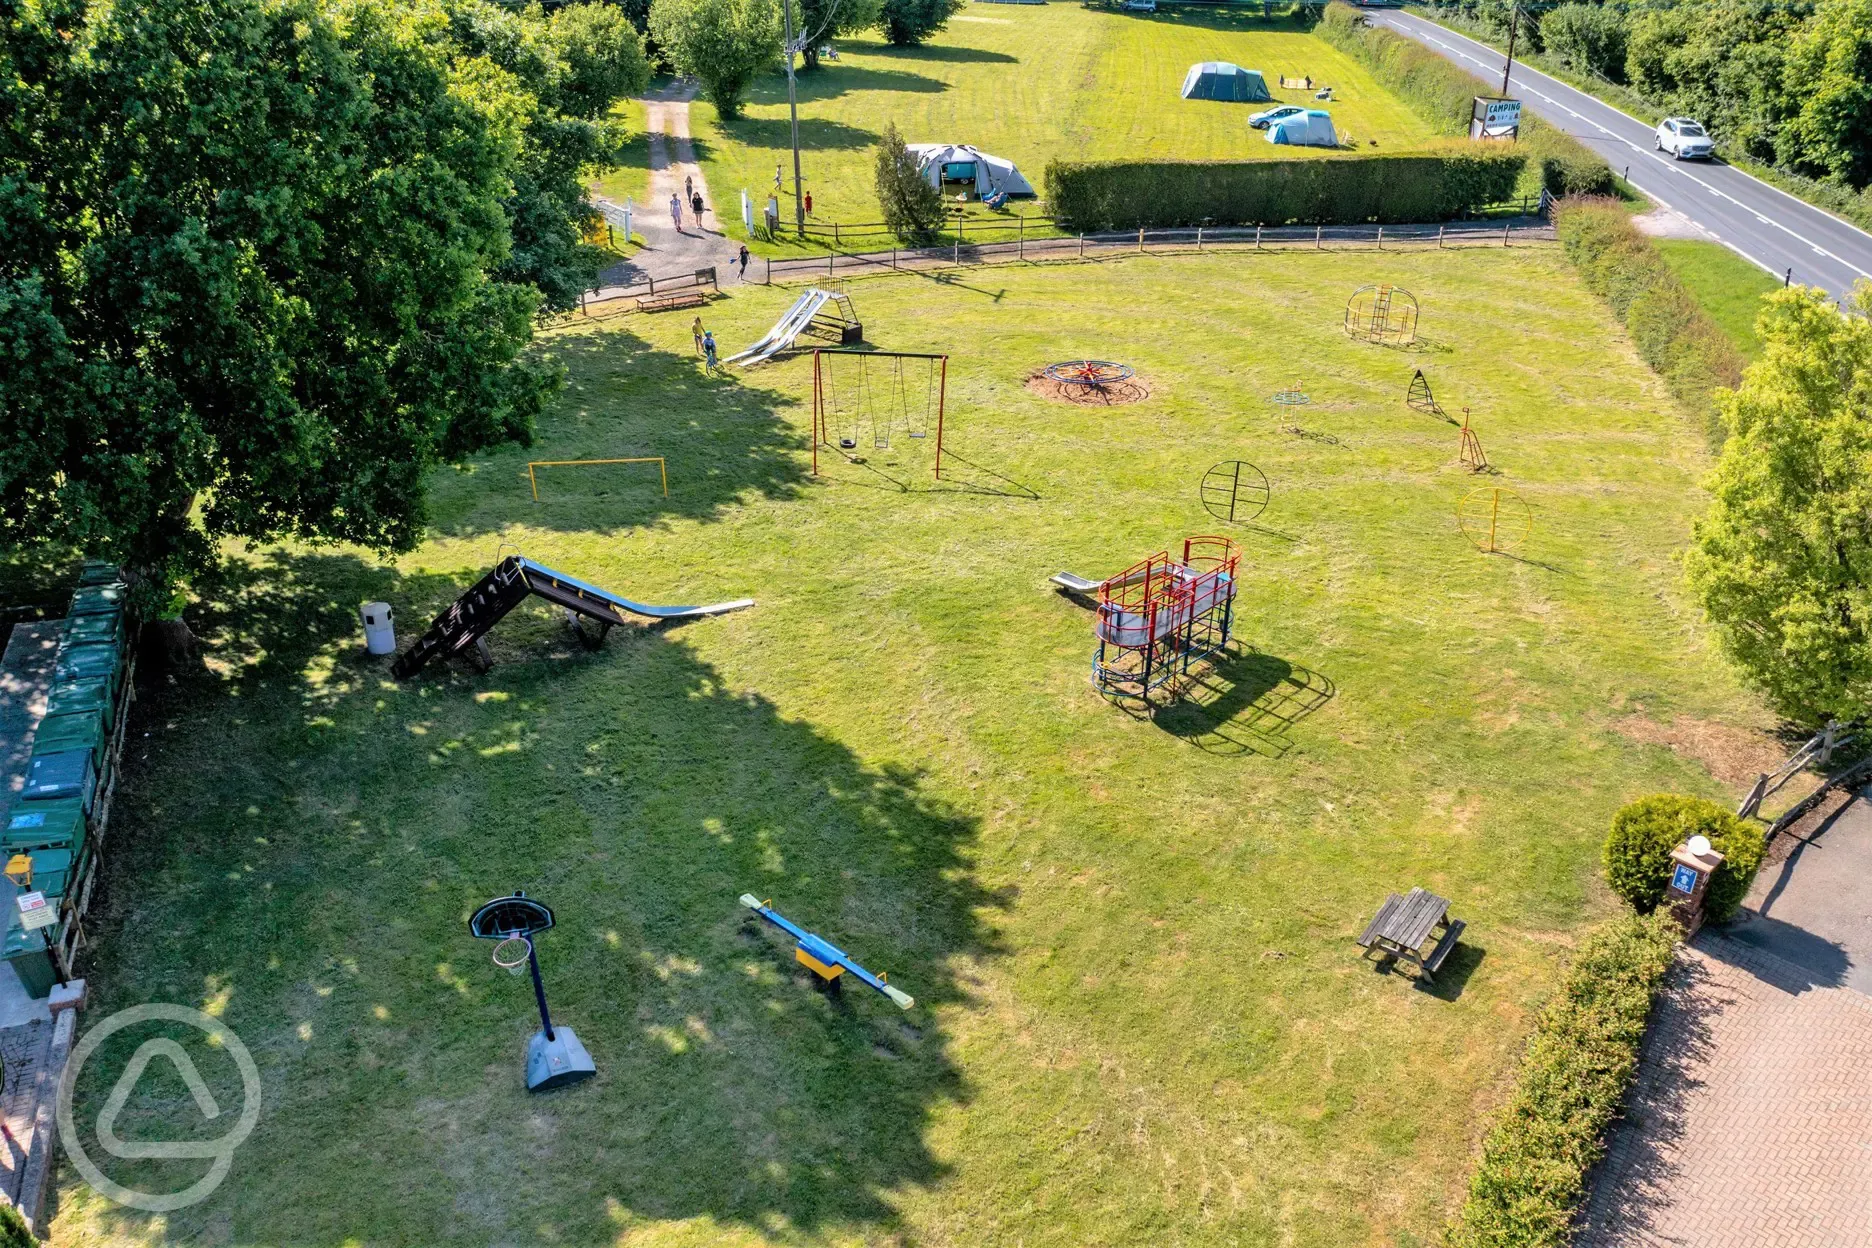 Aerial view of children's play area